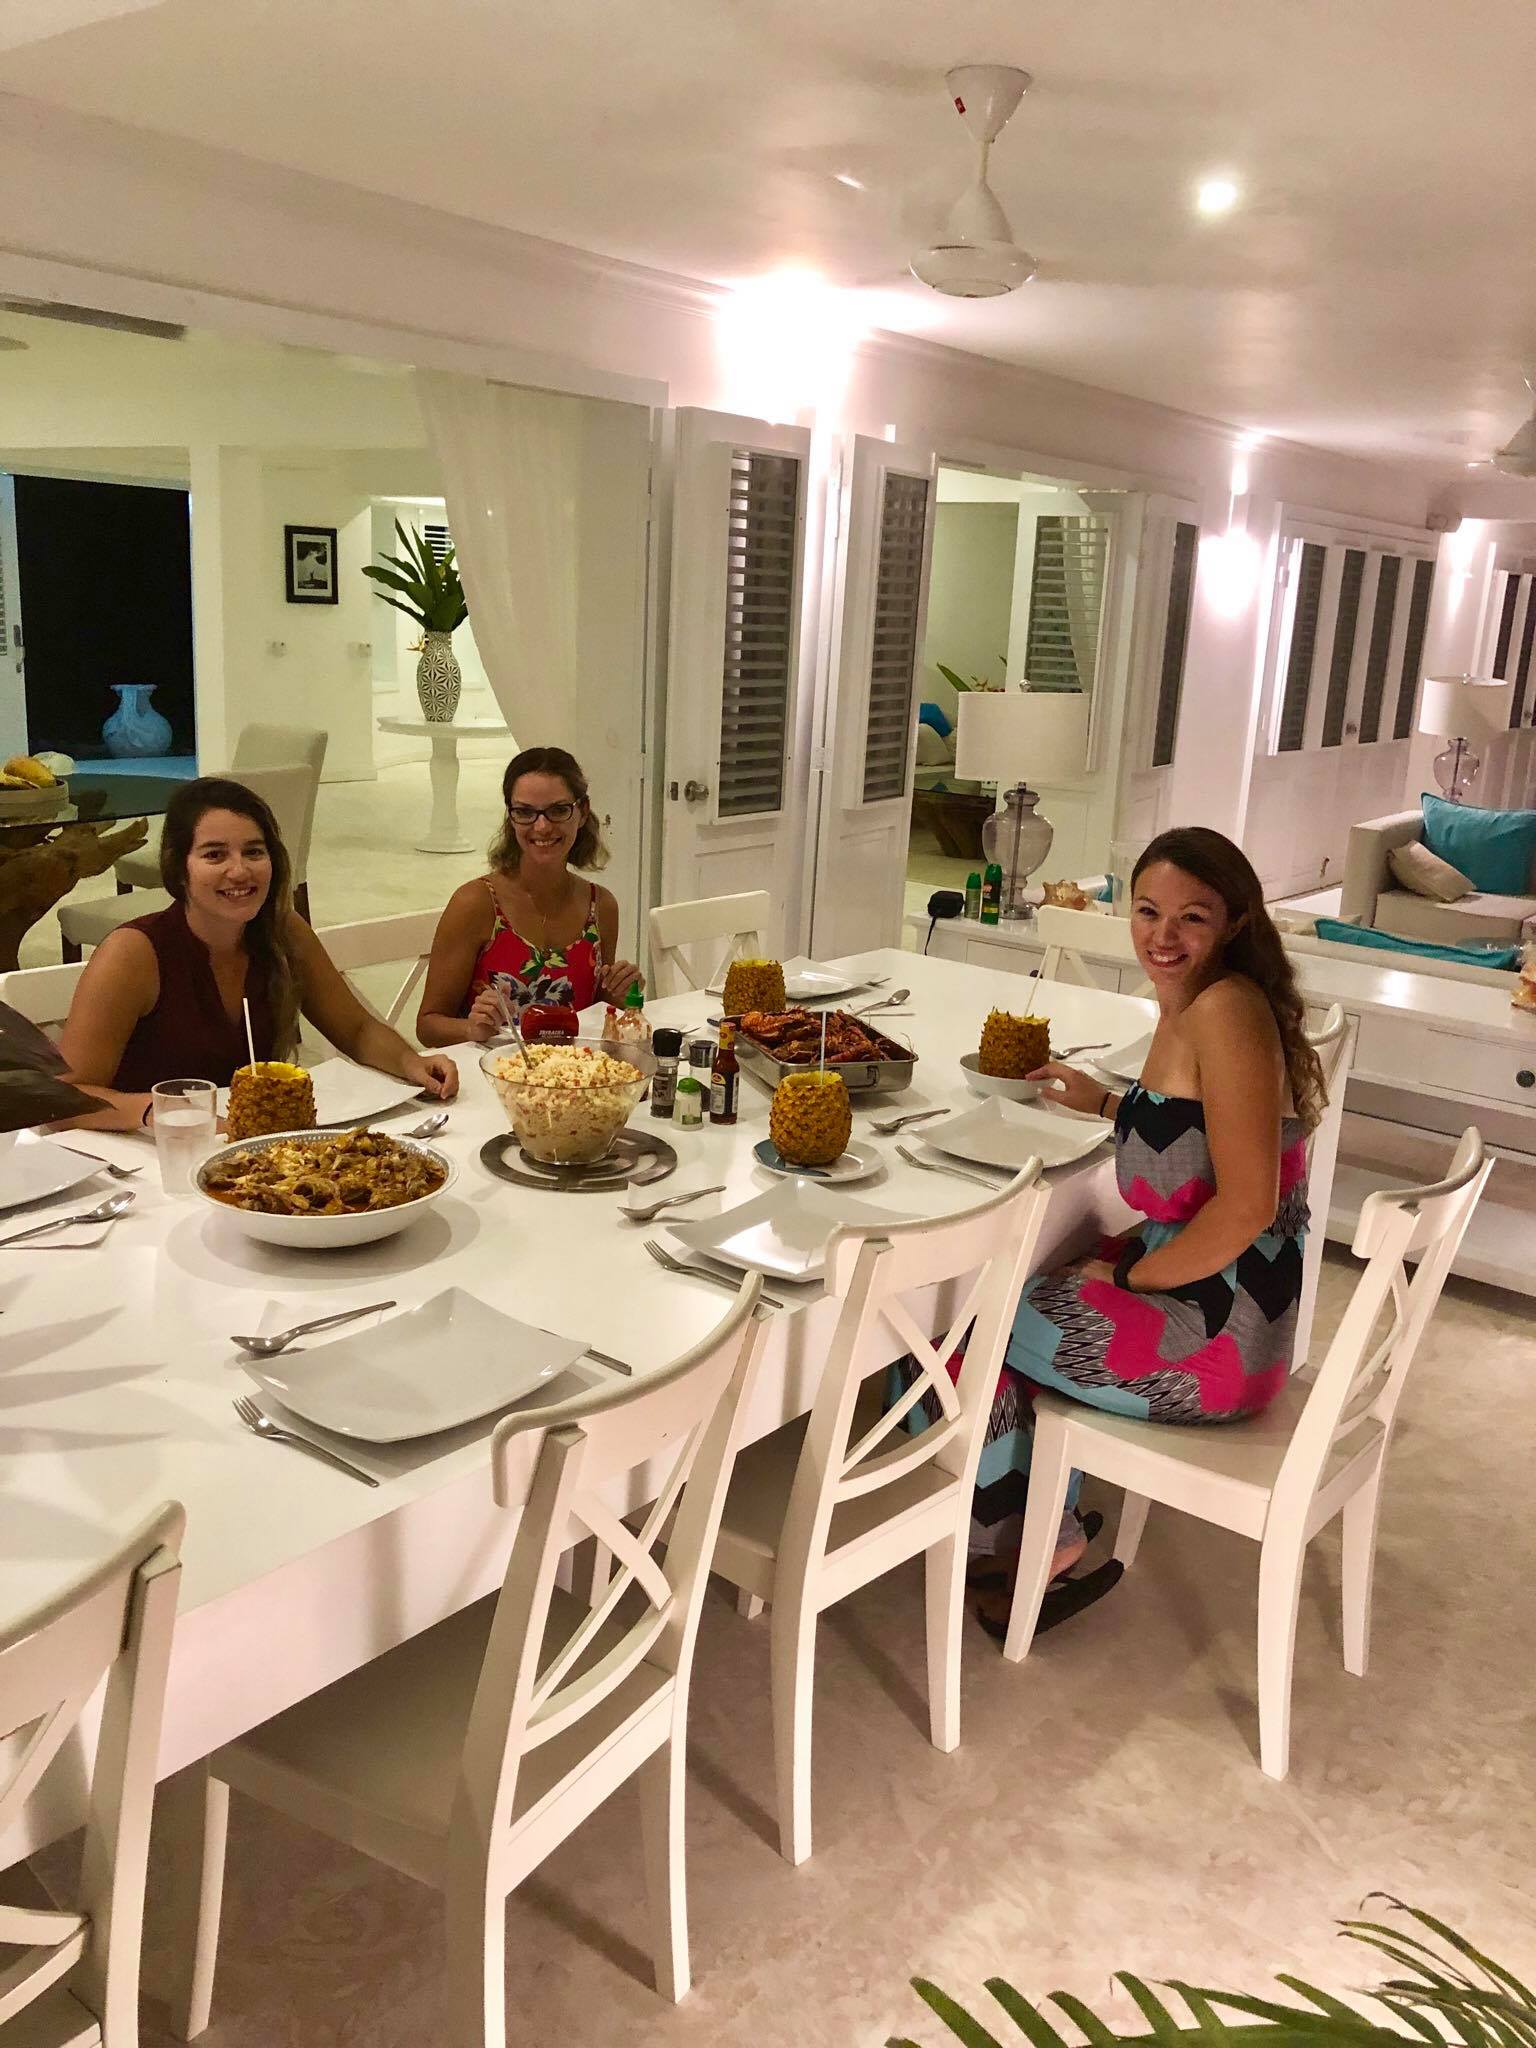 Liveaboard Life Day 272: Our Thanksgiving Holiday in Casa Blanca Las Terrenas!